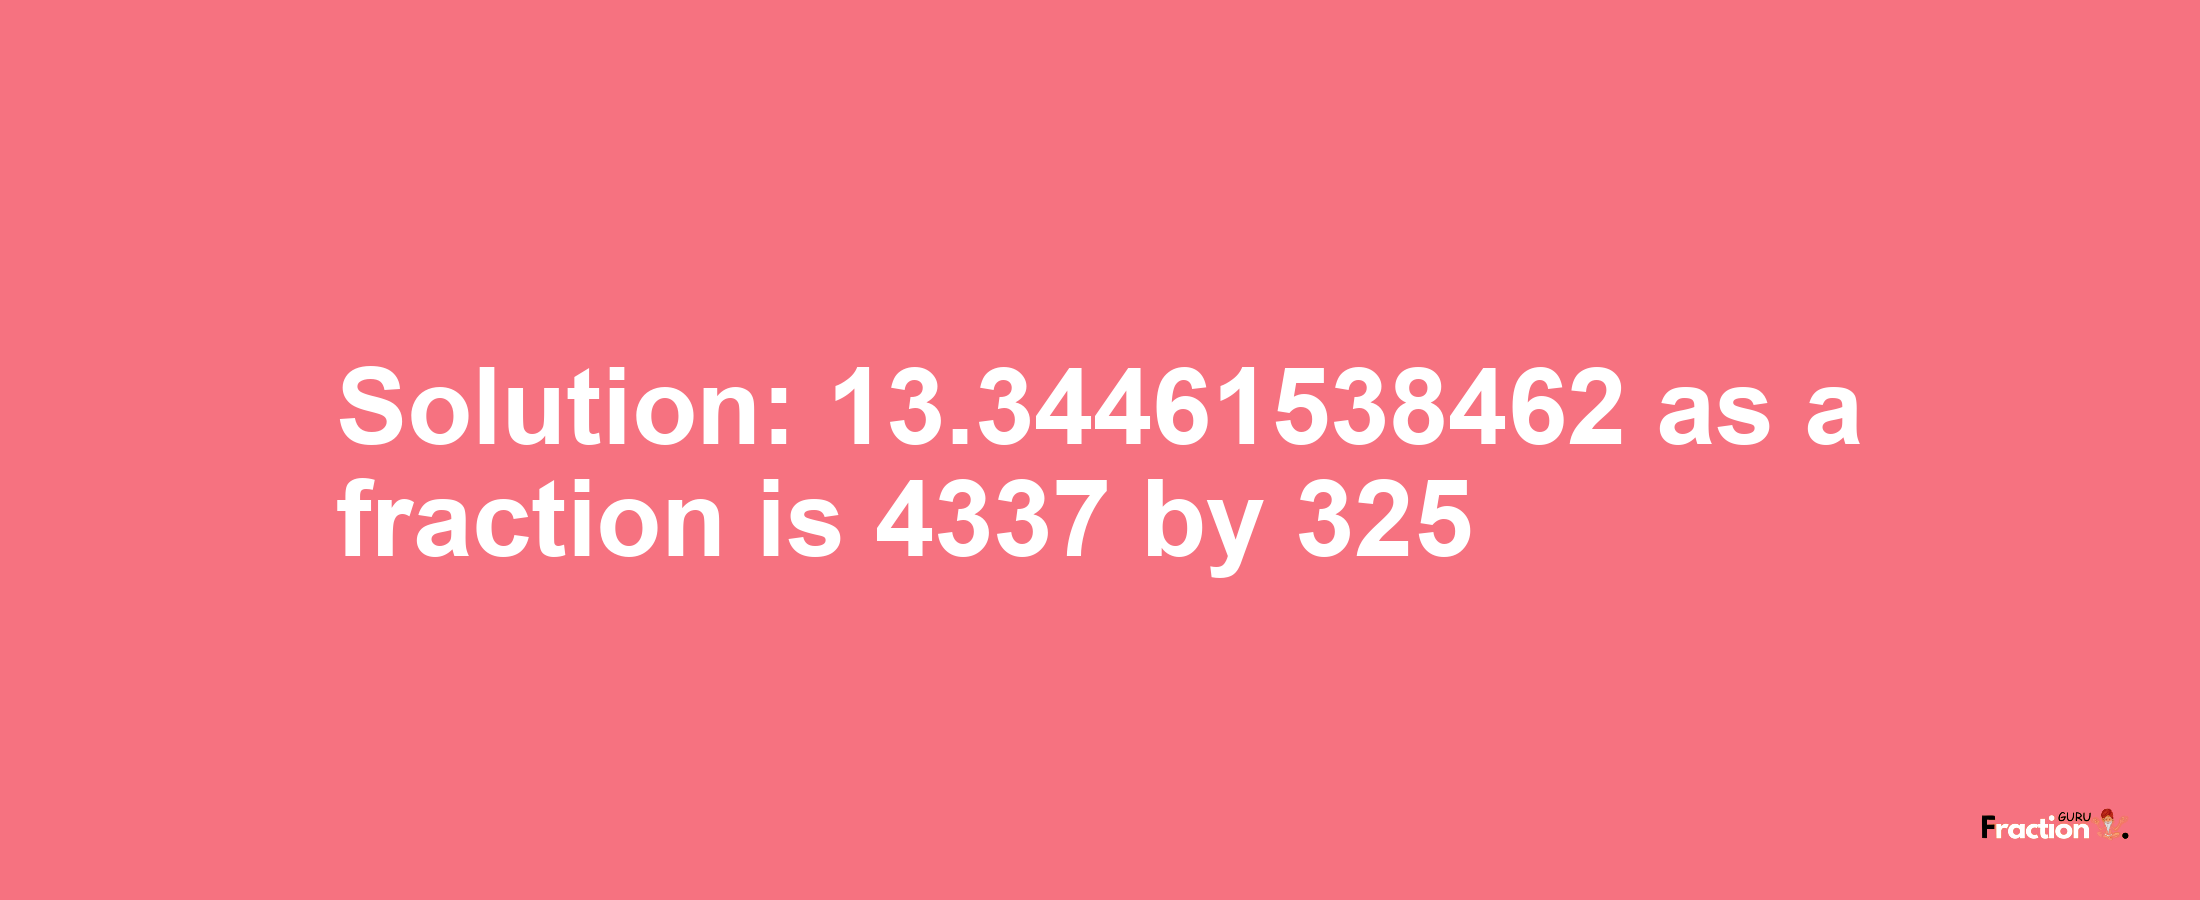 Solution:13.34461538462 as a fraction is 4337/325